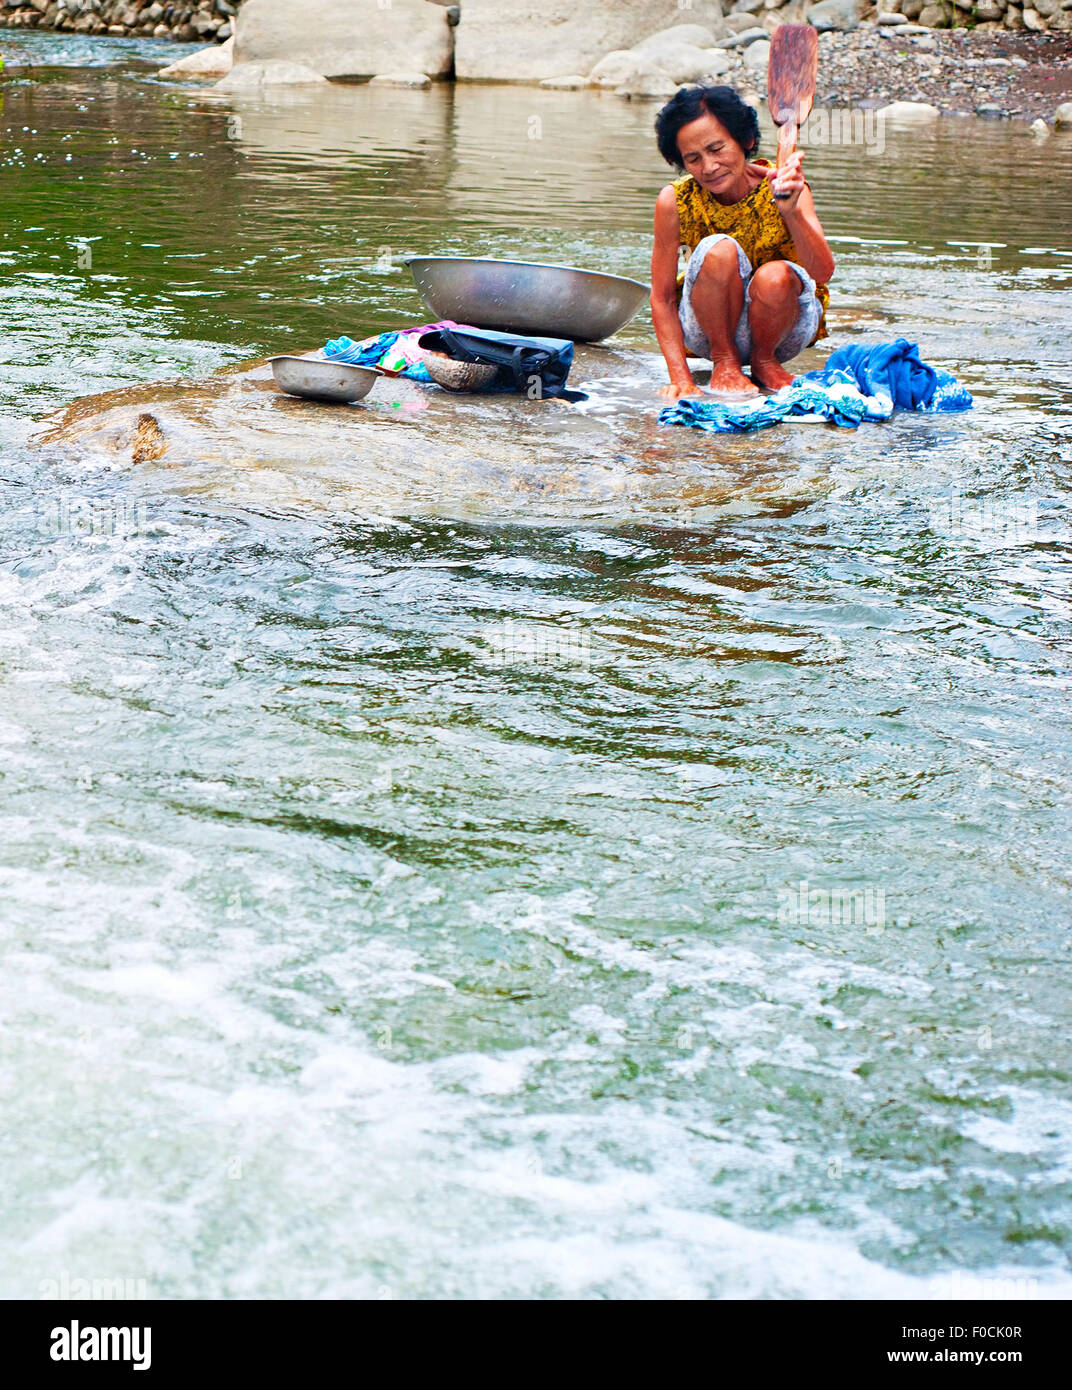 https://c8.alamy.com/comp/F0CK0R/philippines-woman-washing-clothes-on-the-river-in-traditional-way-F0CK0R.jpg